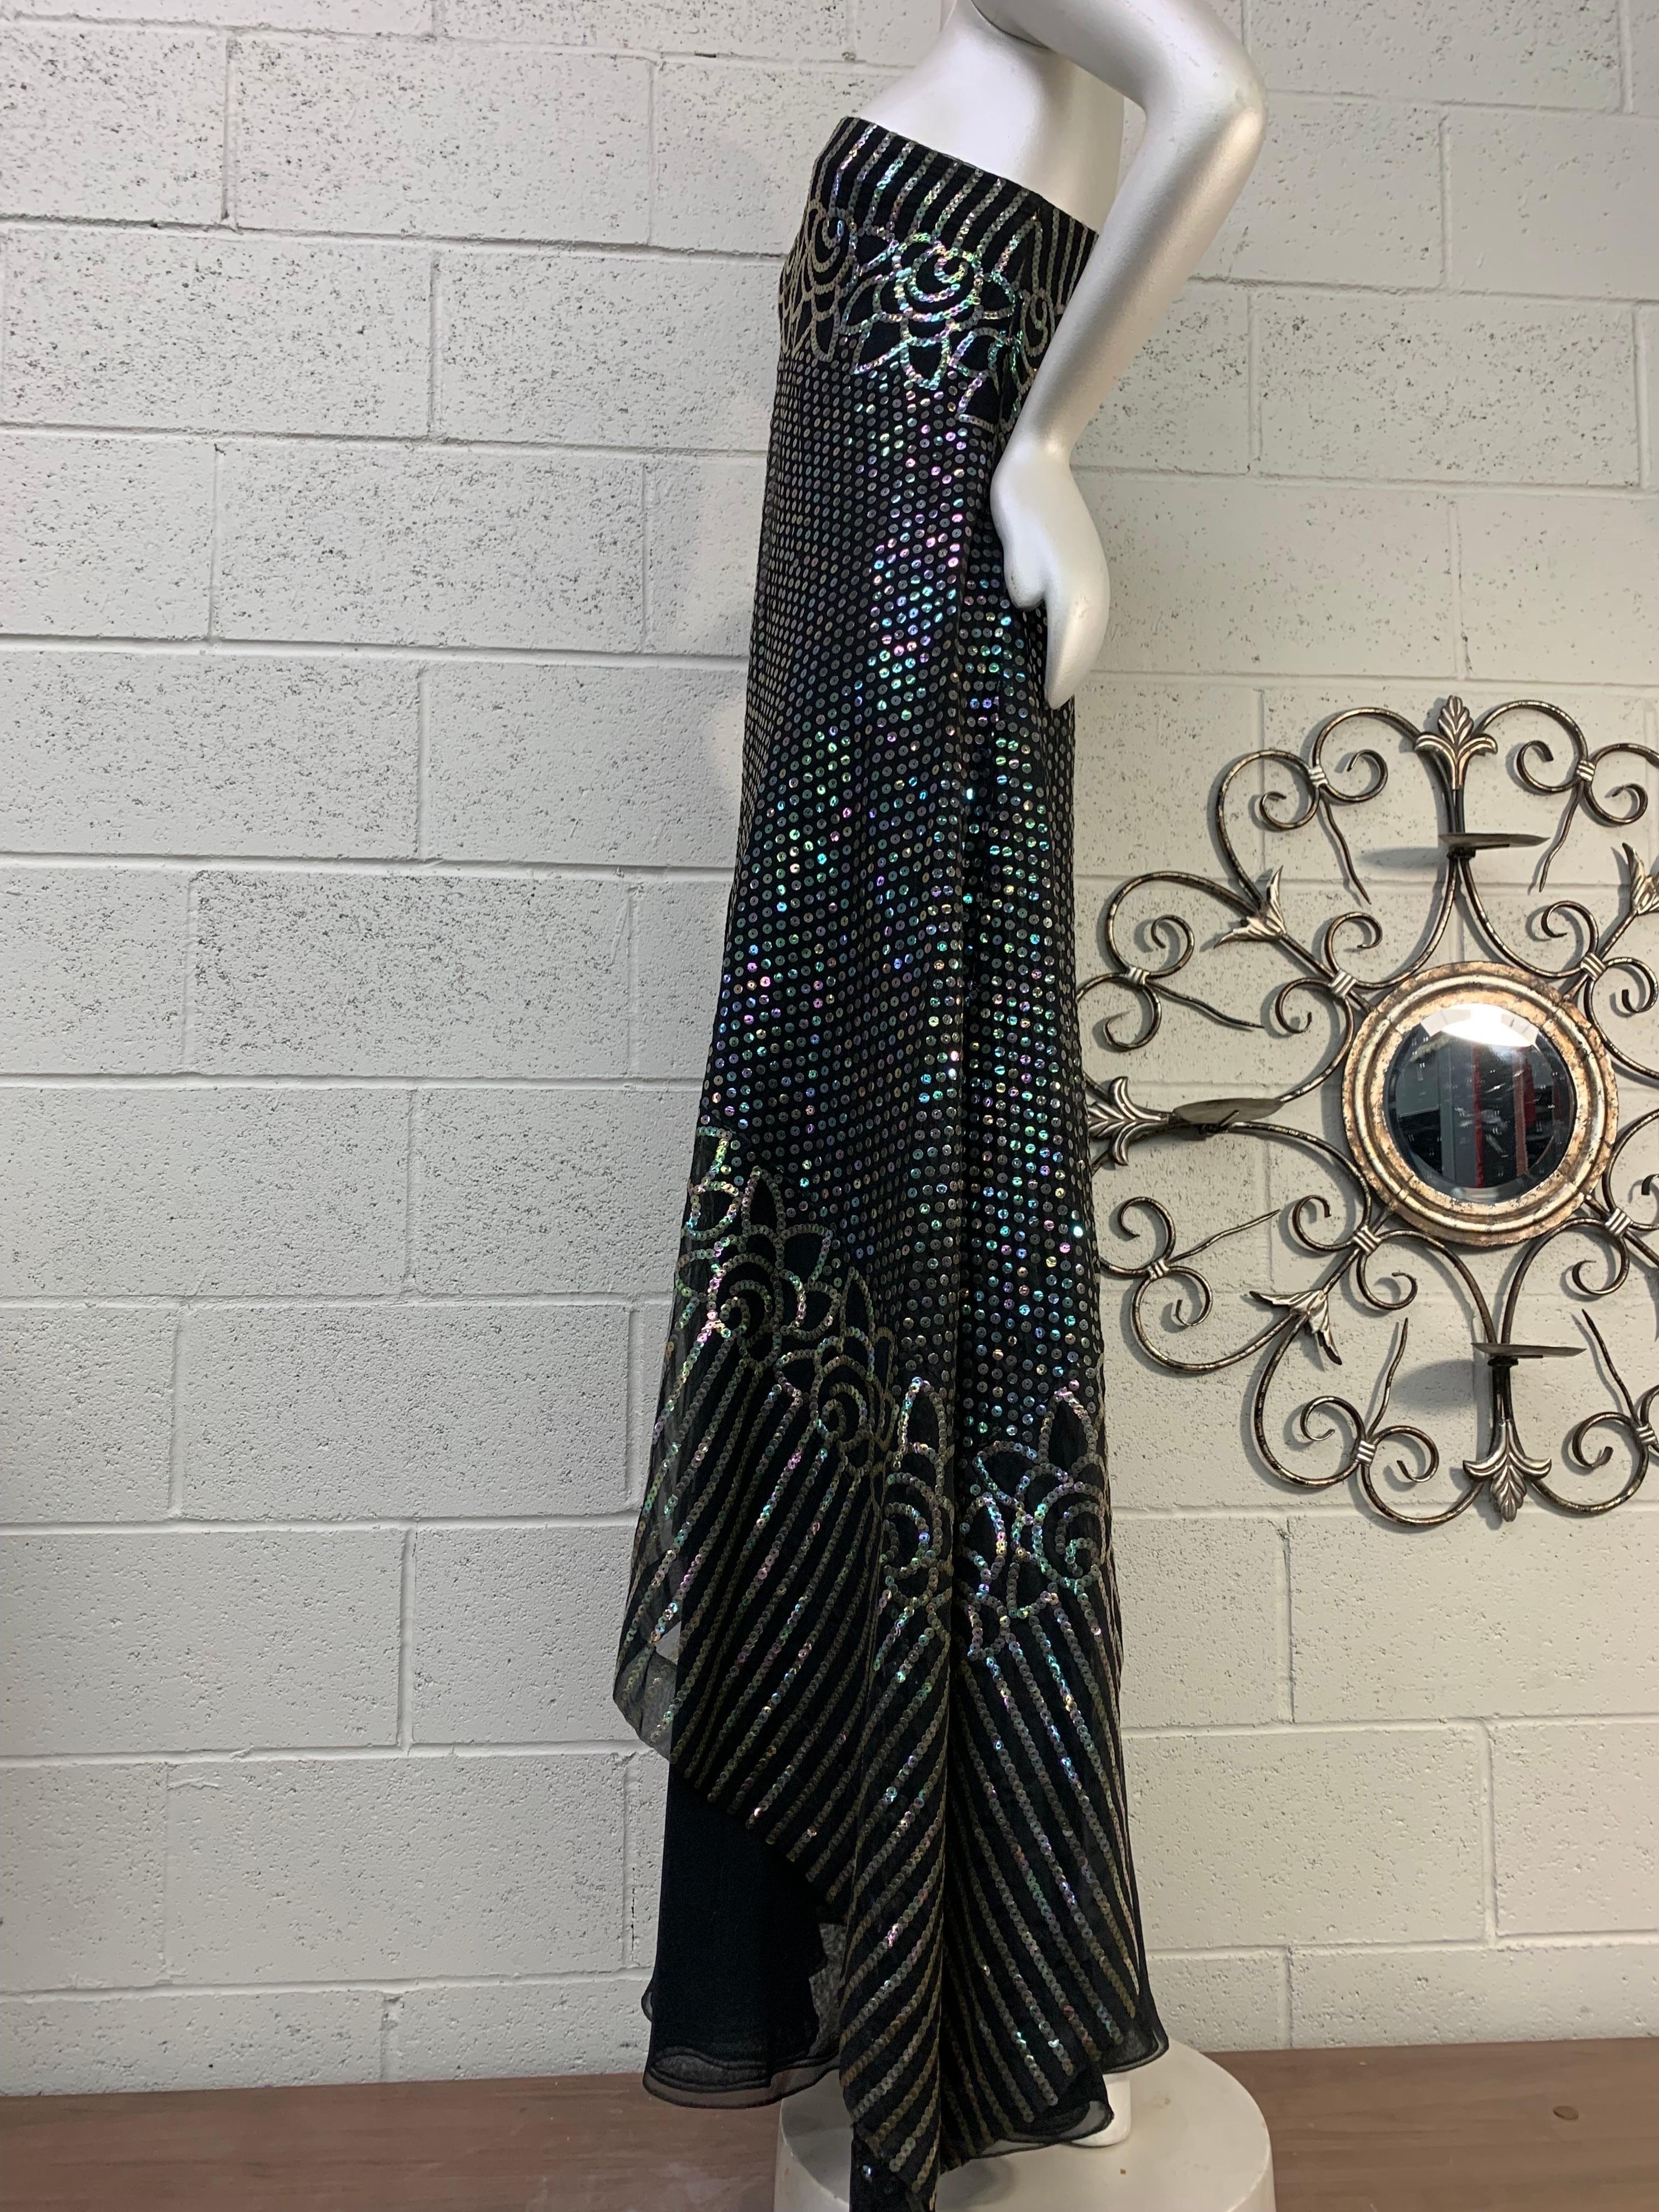 1970 Ruben Panis Black Chiffon Hologram Sequin Art Deco Styled One-Shoulder Gown For Sale 5